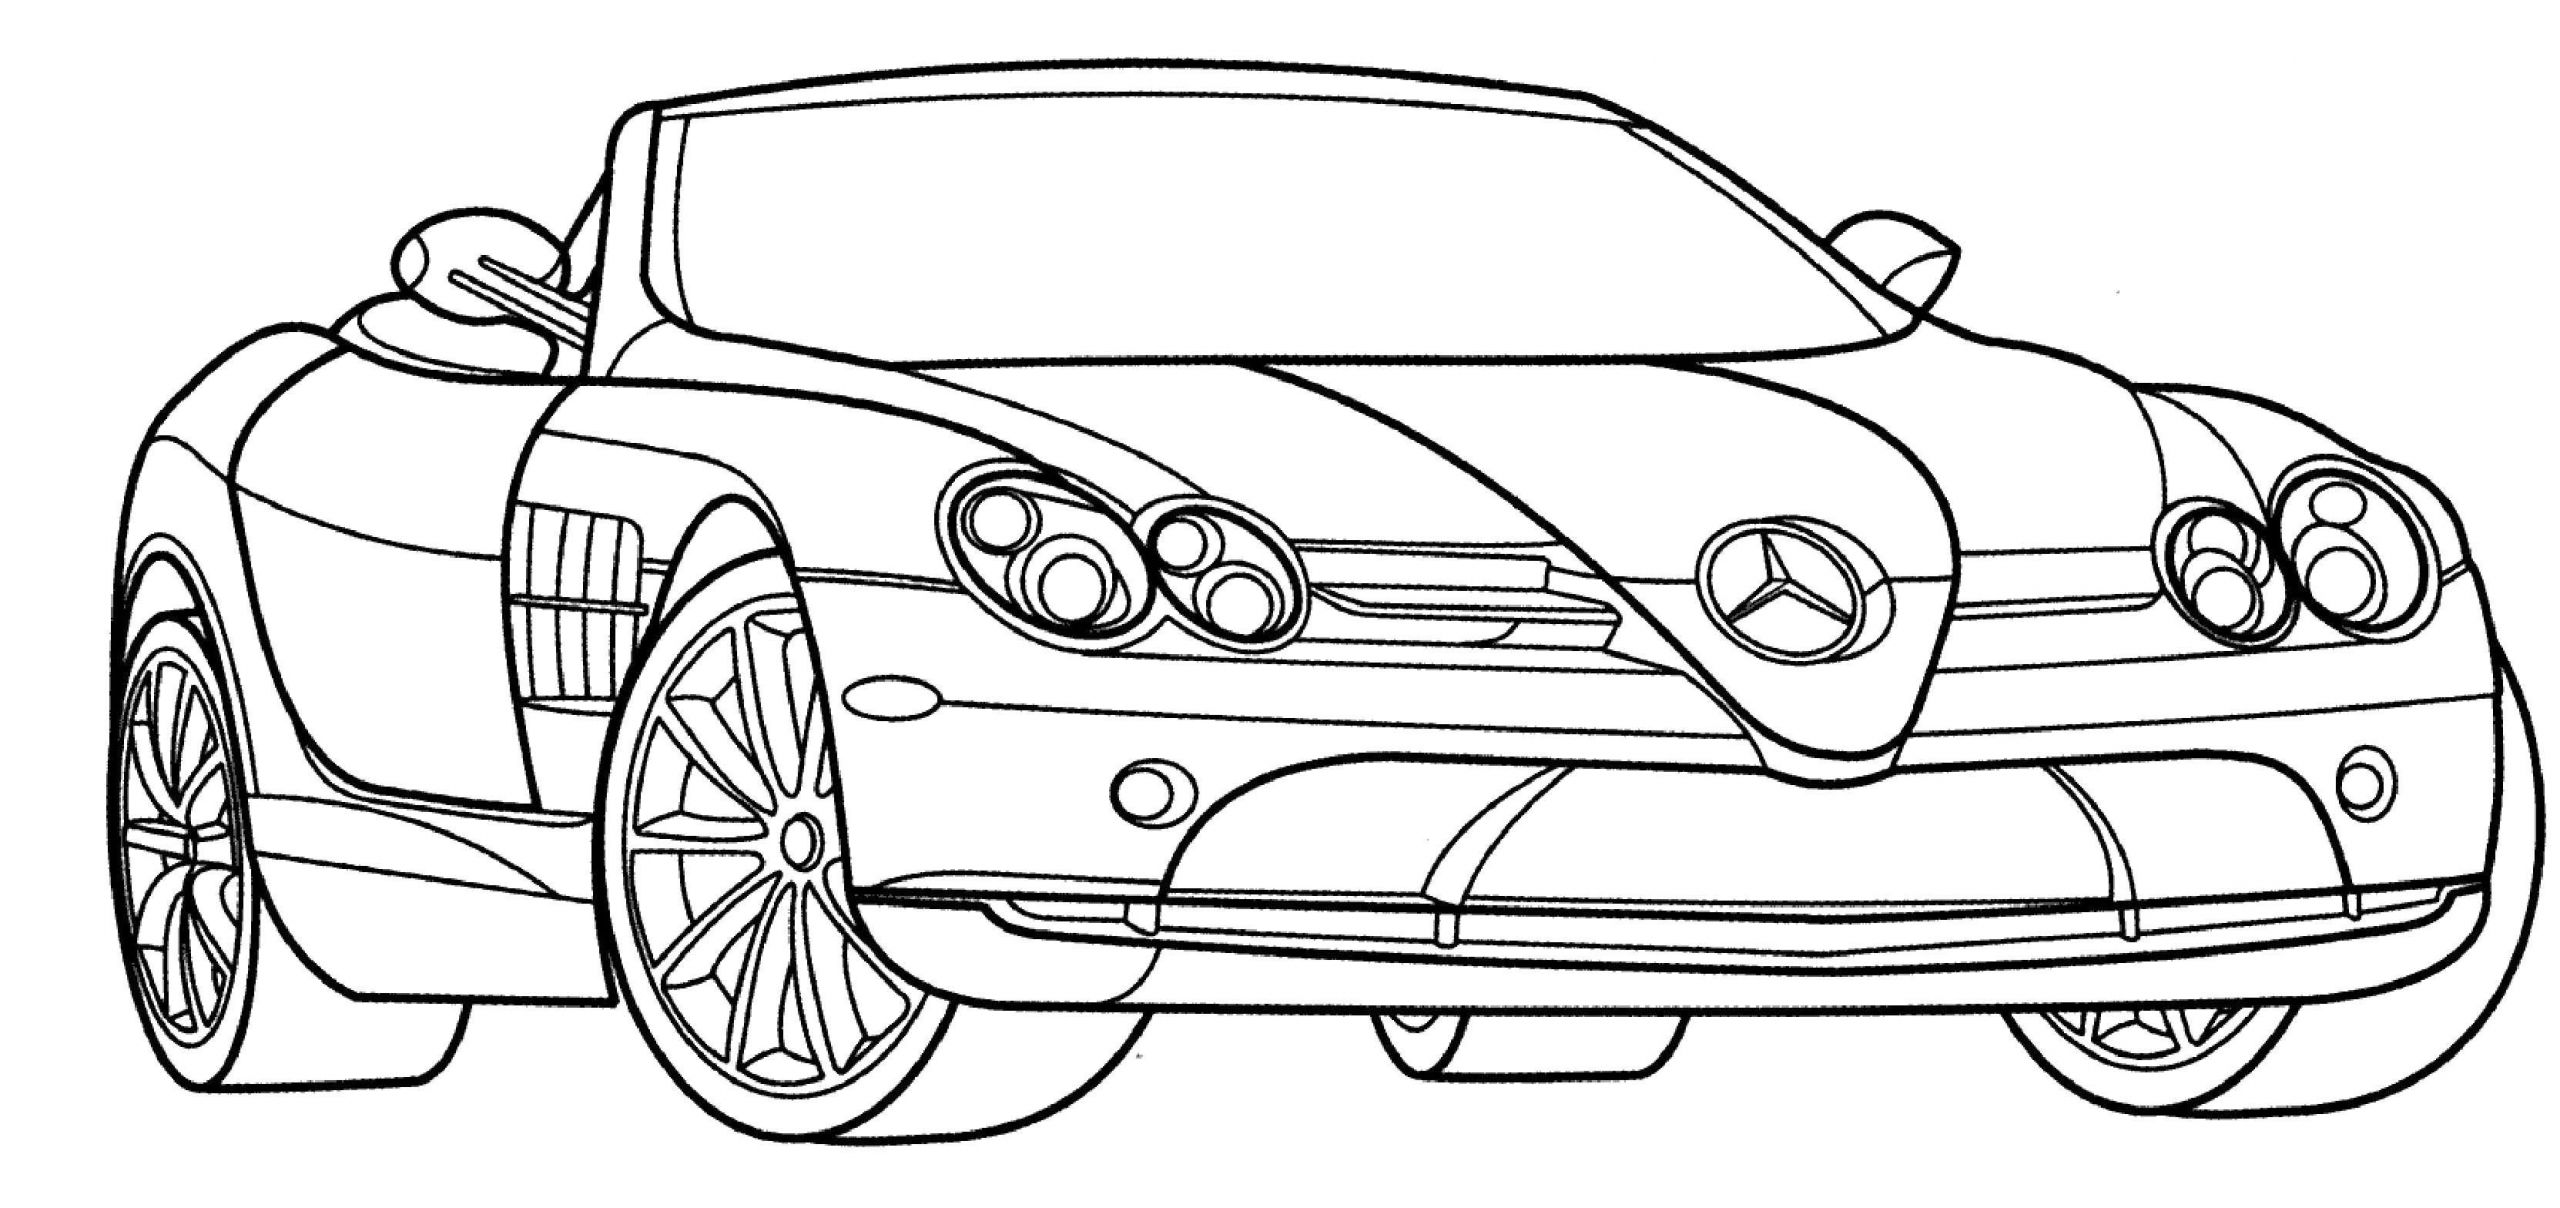 Adult Coloring Pages Cars
 Super Car Coloring Pages Resume Format Download Pdf